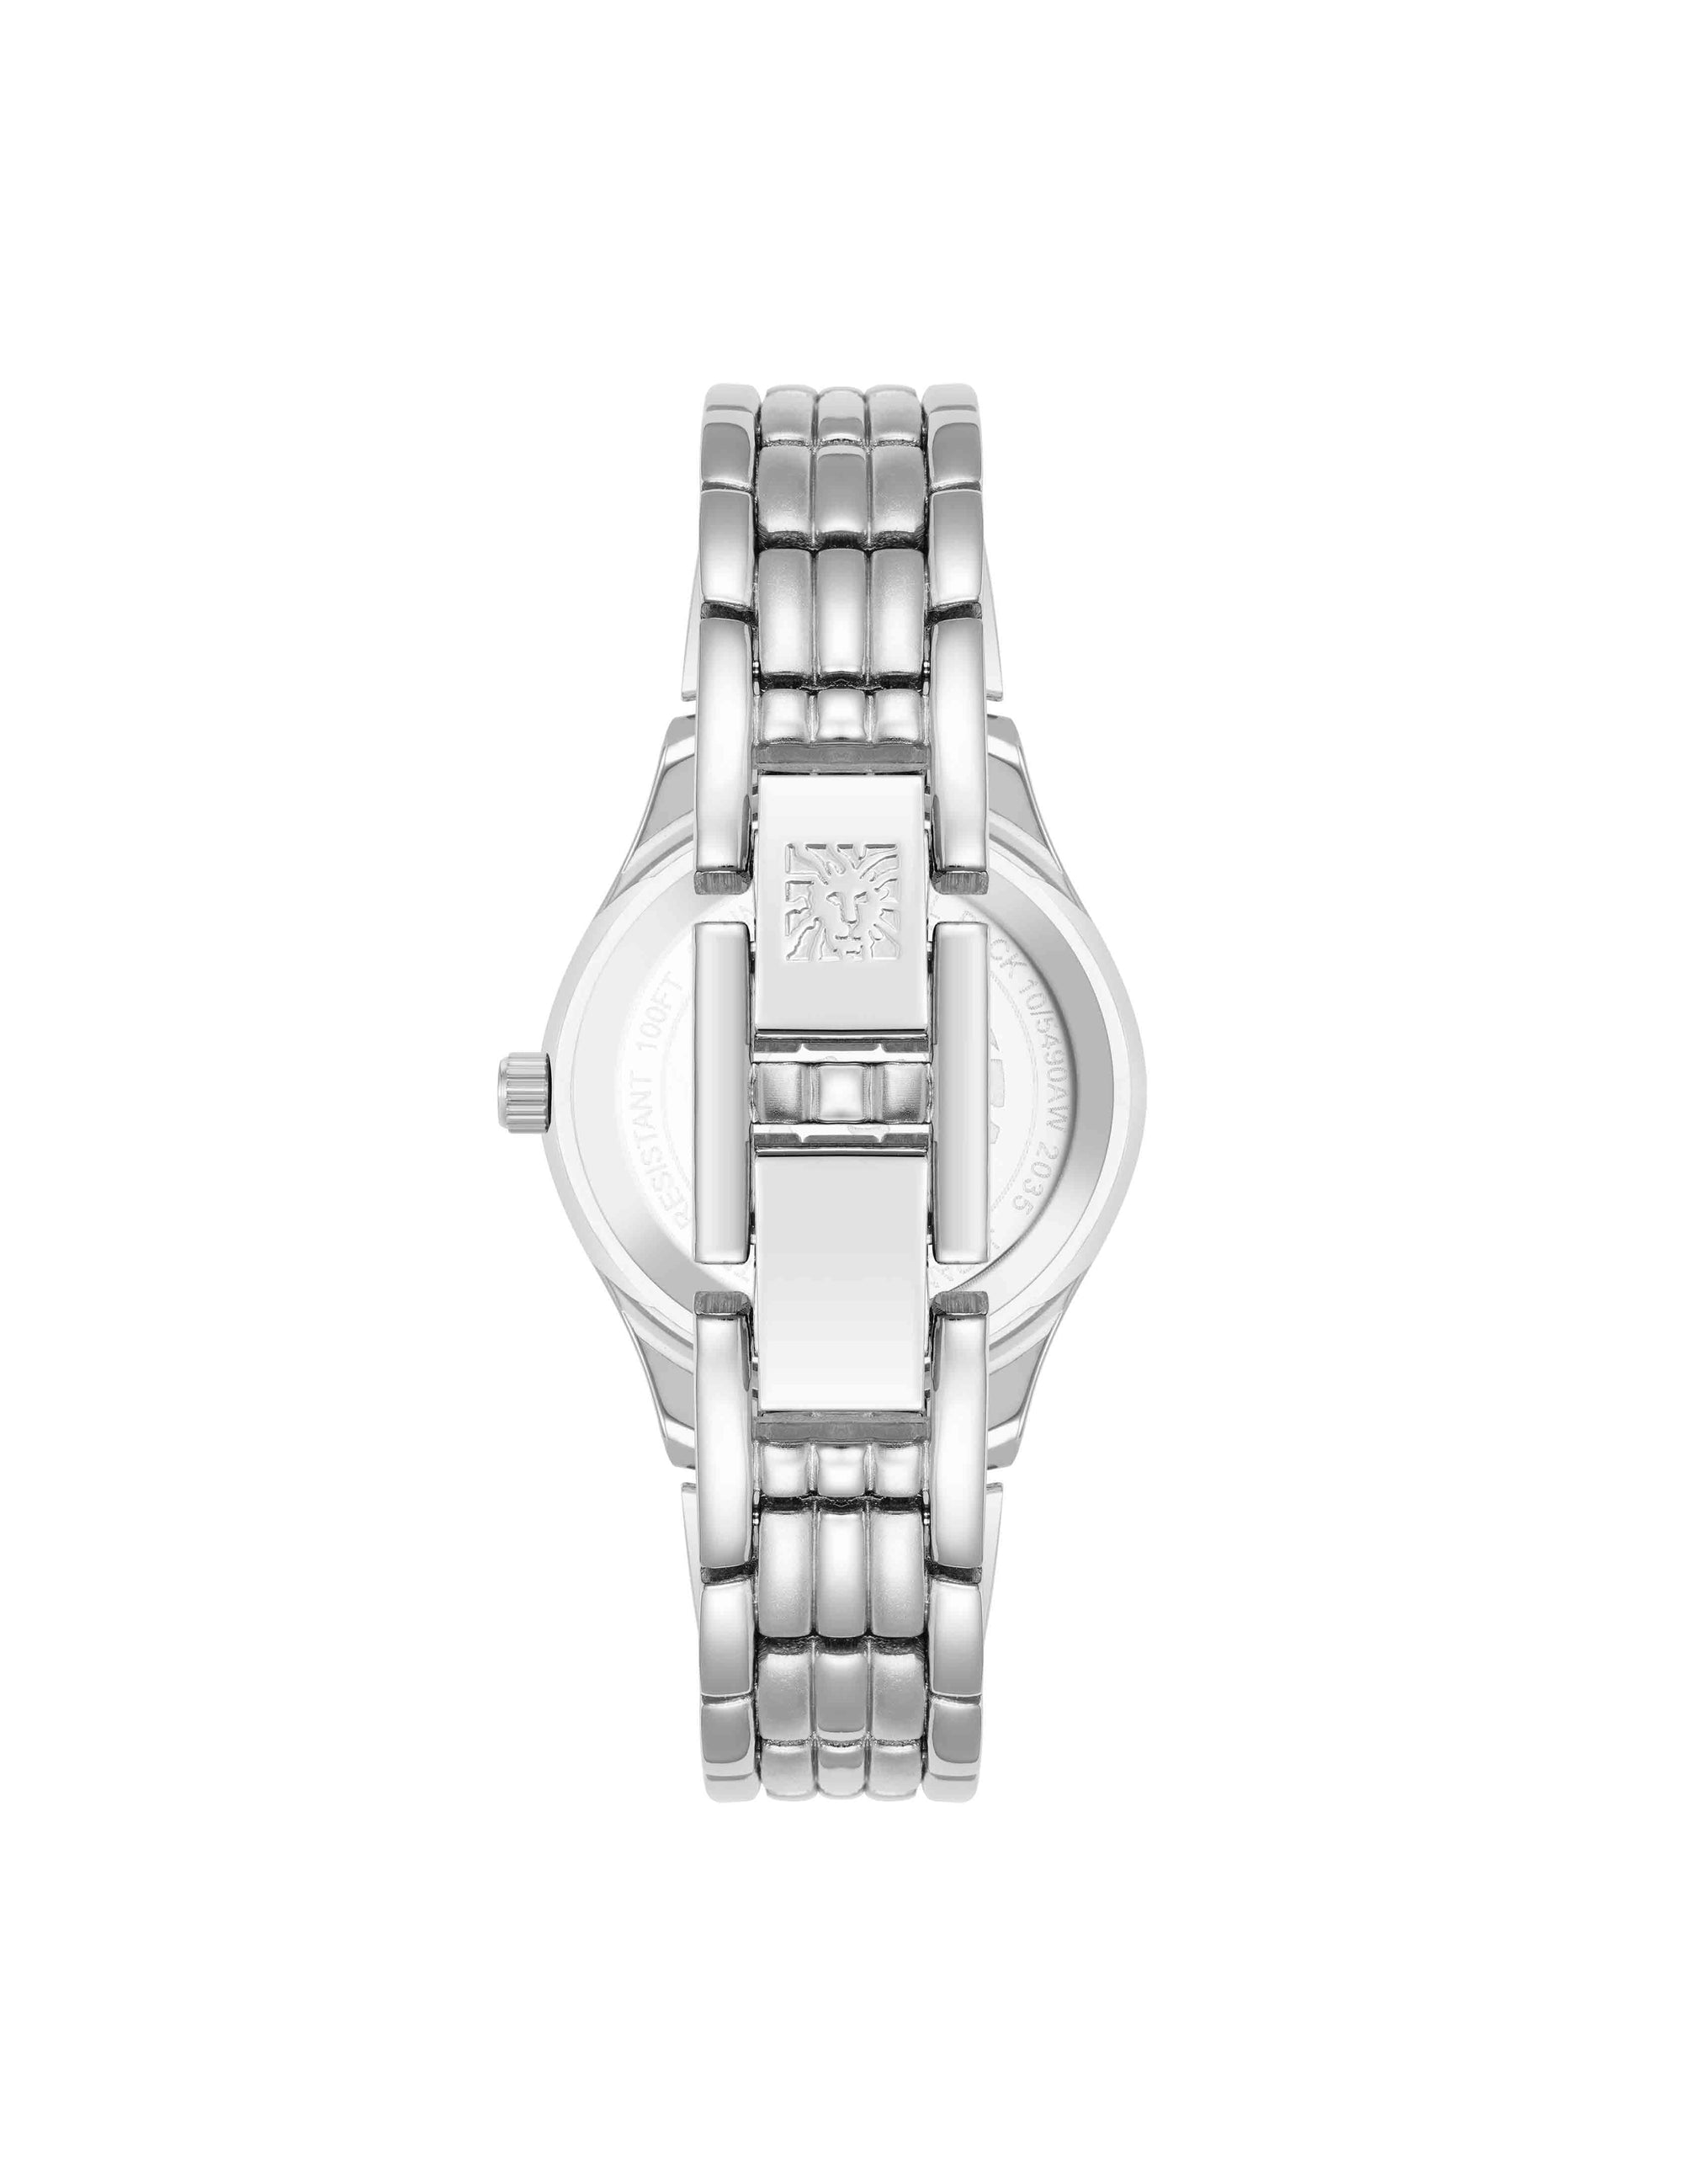 Anne Klein Silver-Tone Classic Easy To Read Dial Watch